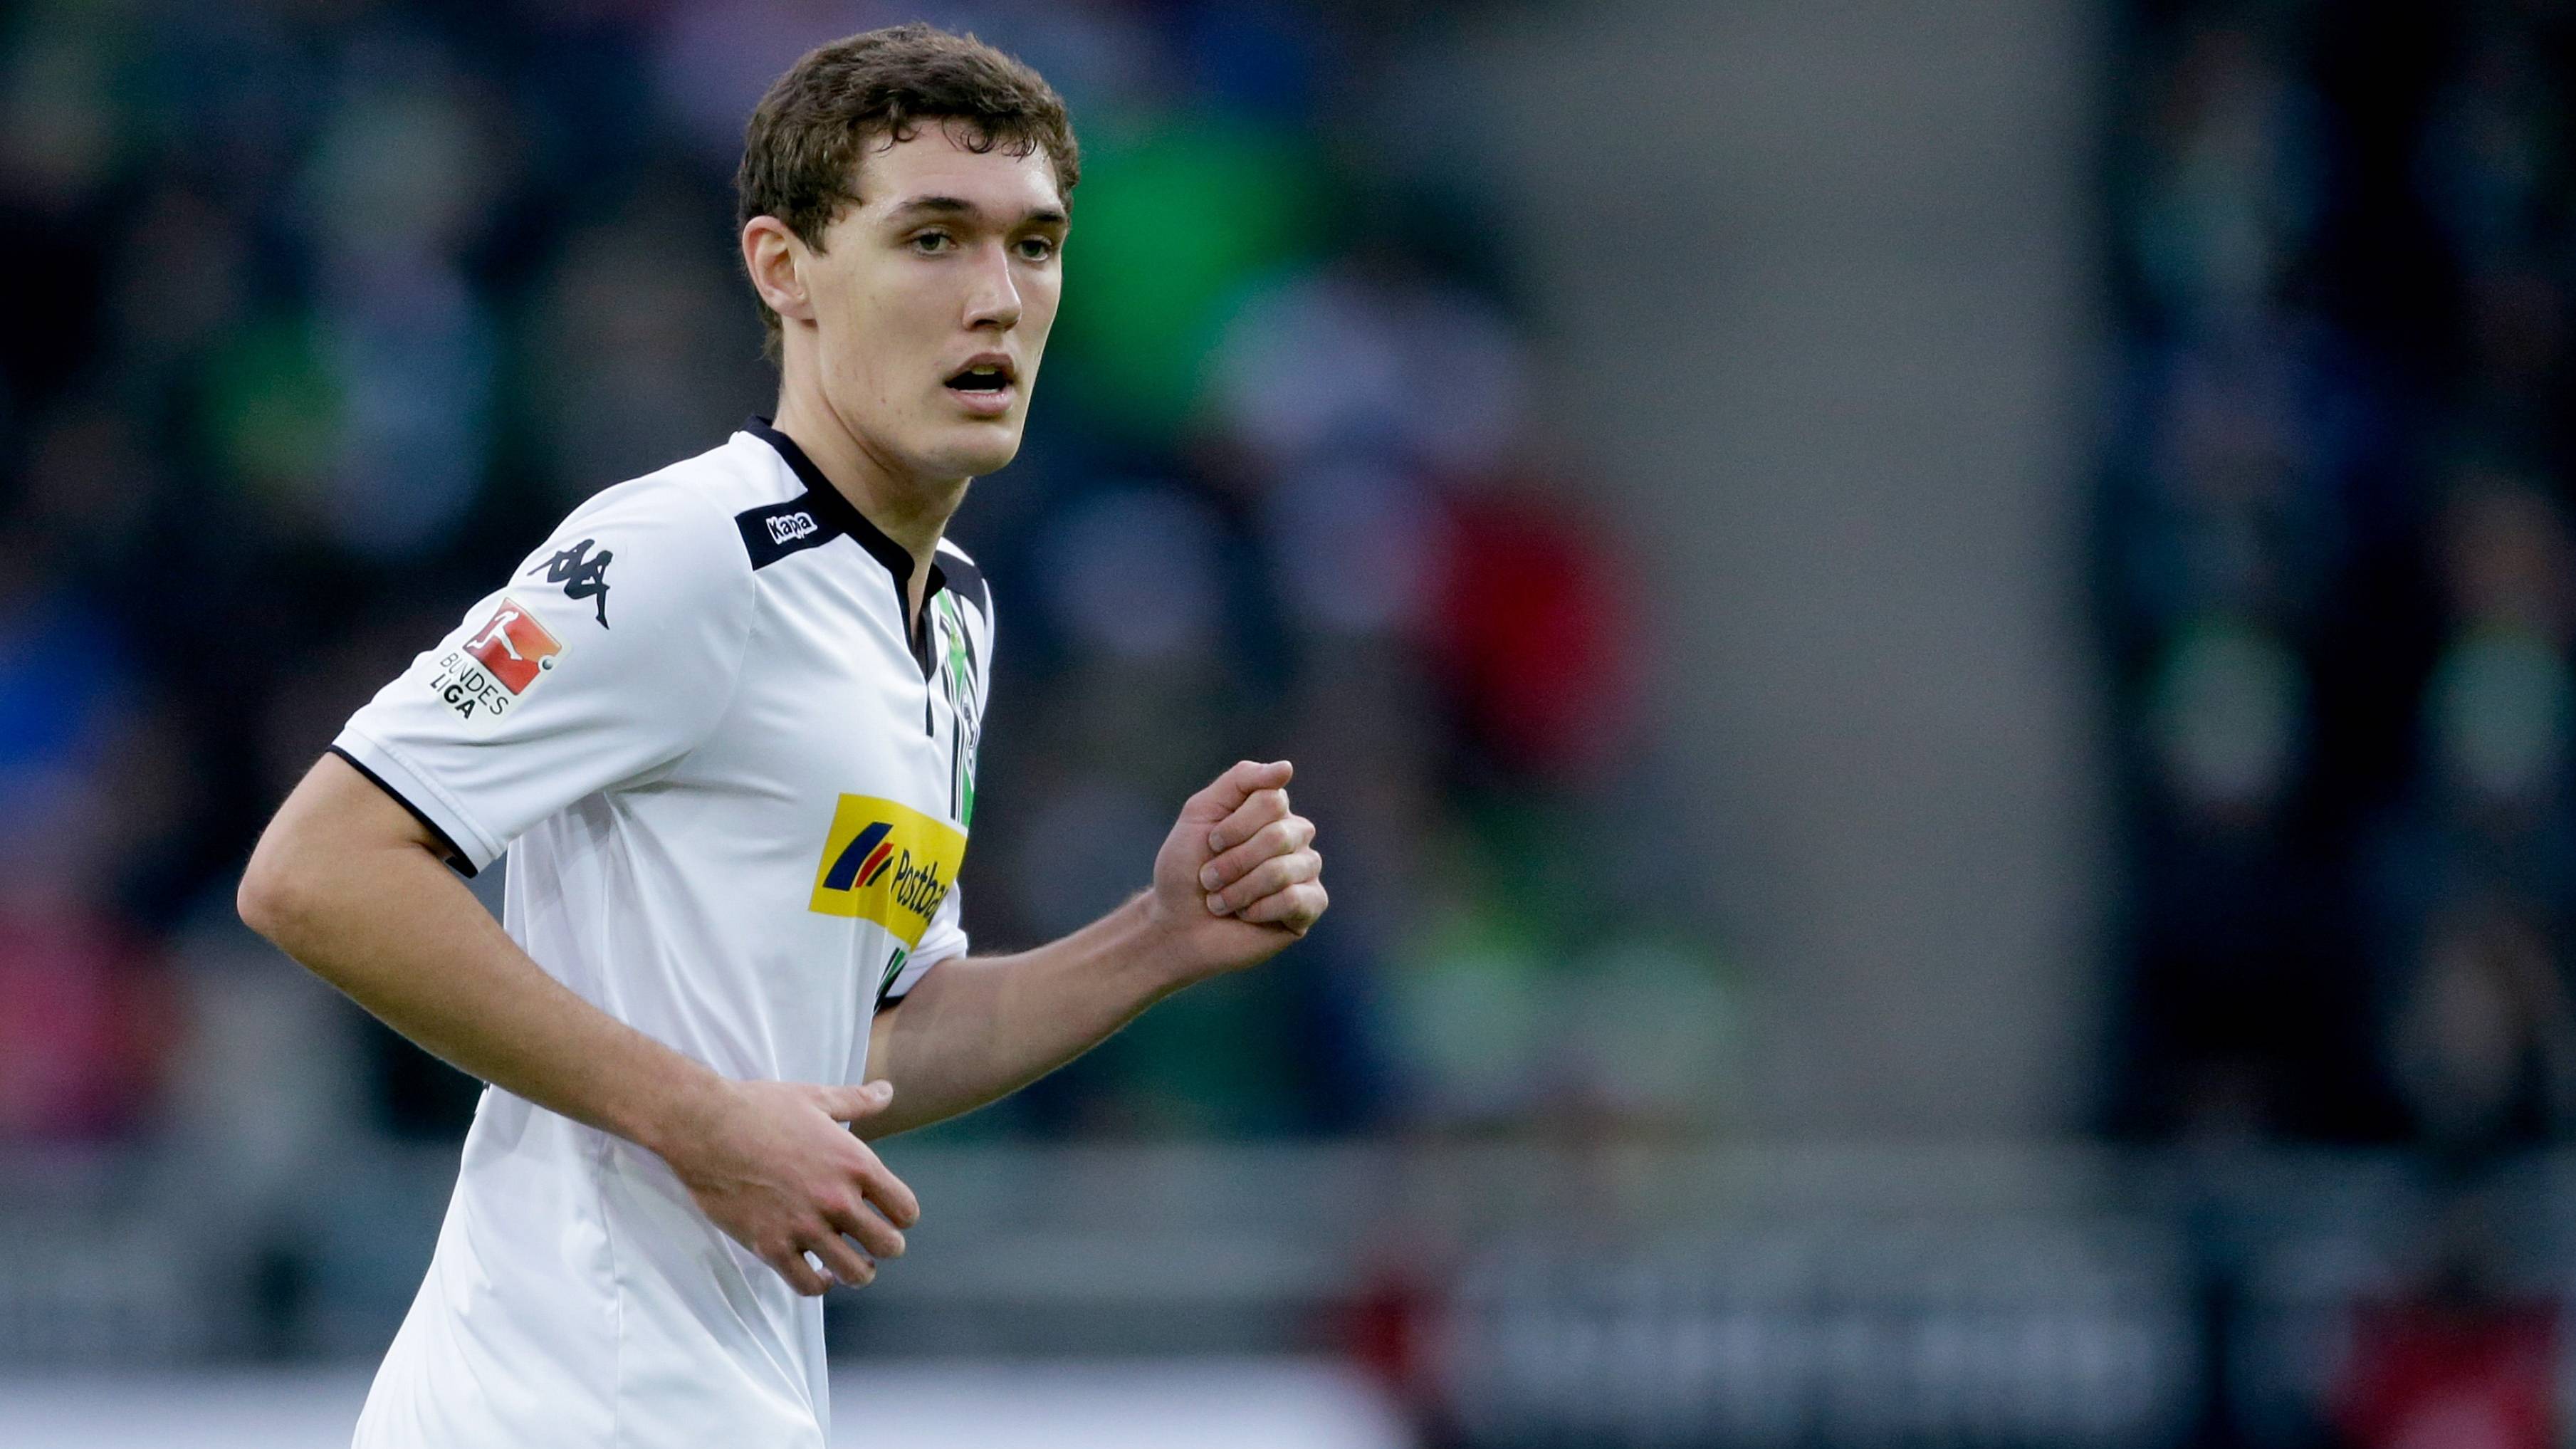 Andreas Christensen, in a party of the Bundesliga